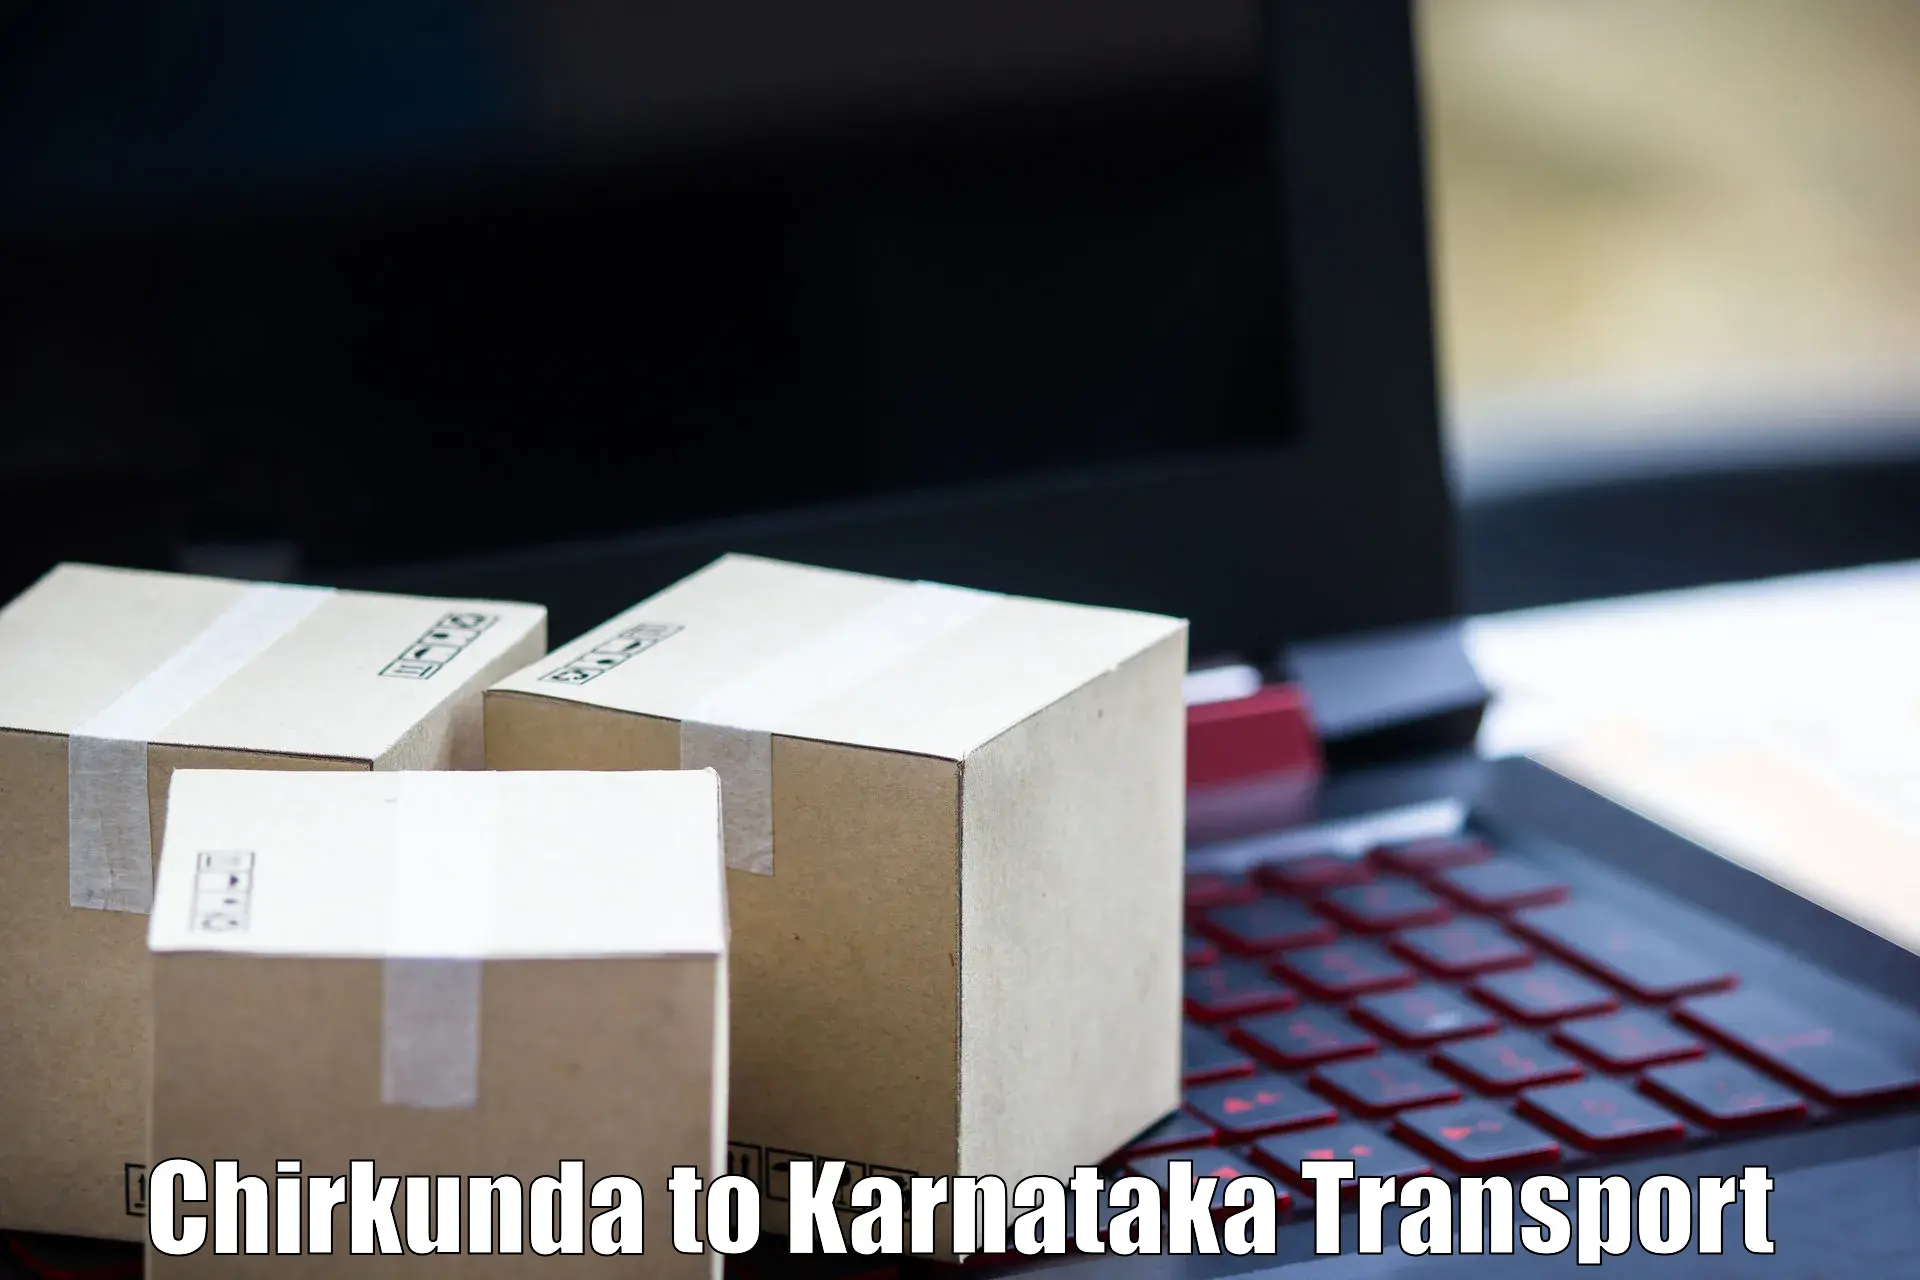 Container transport service Chirkunda to Channapatna